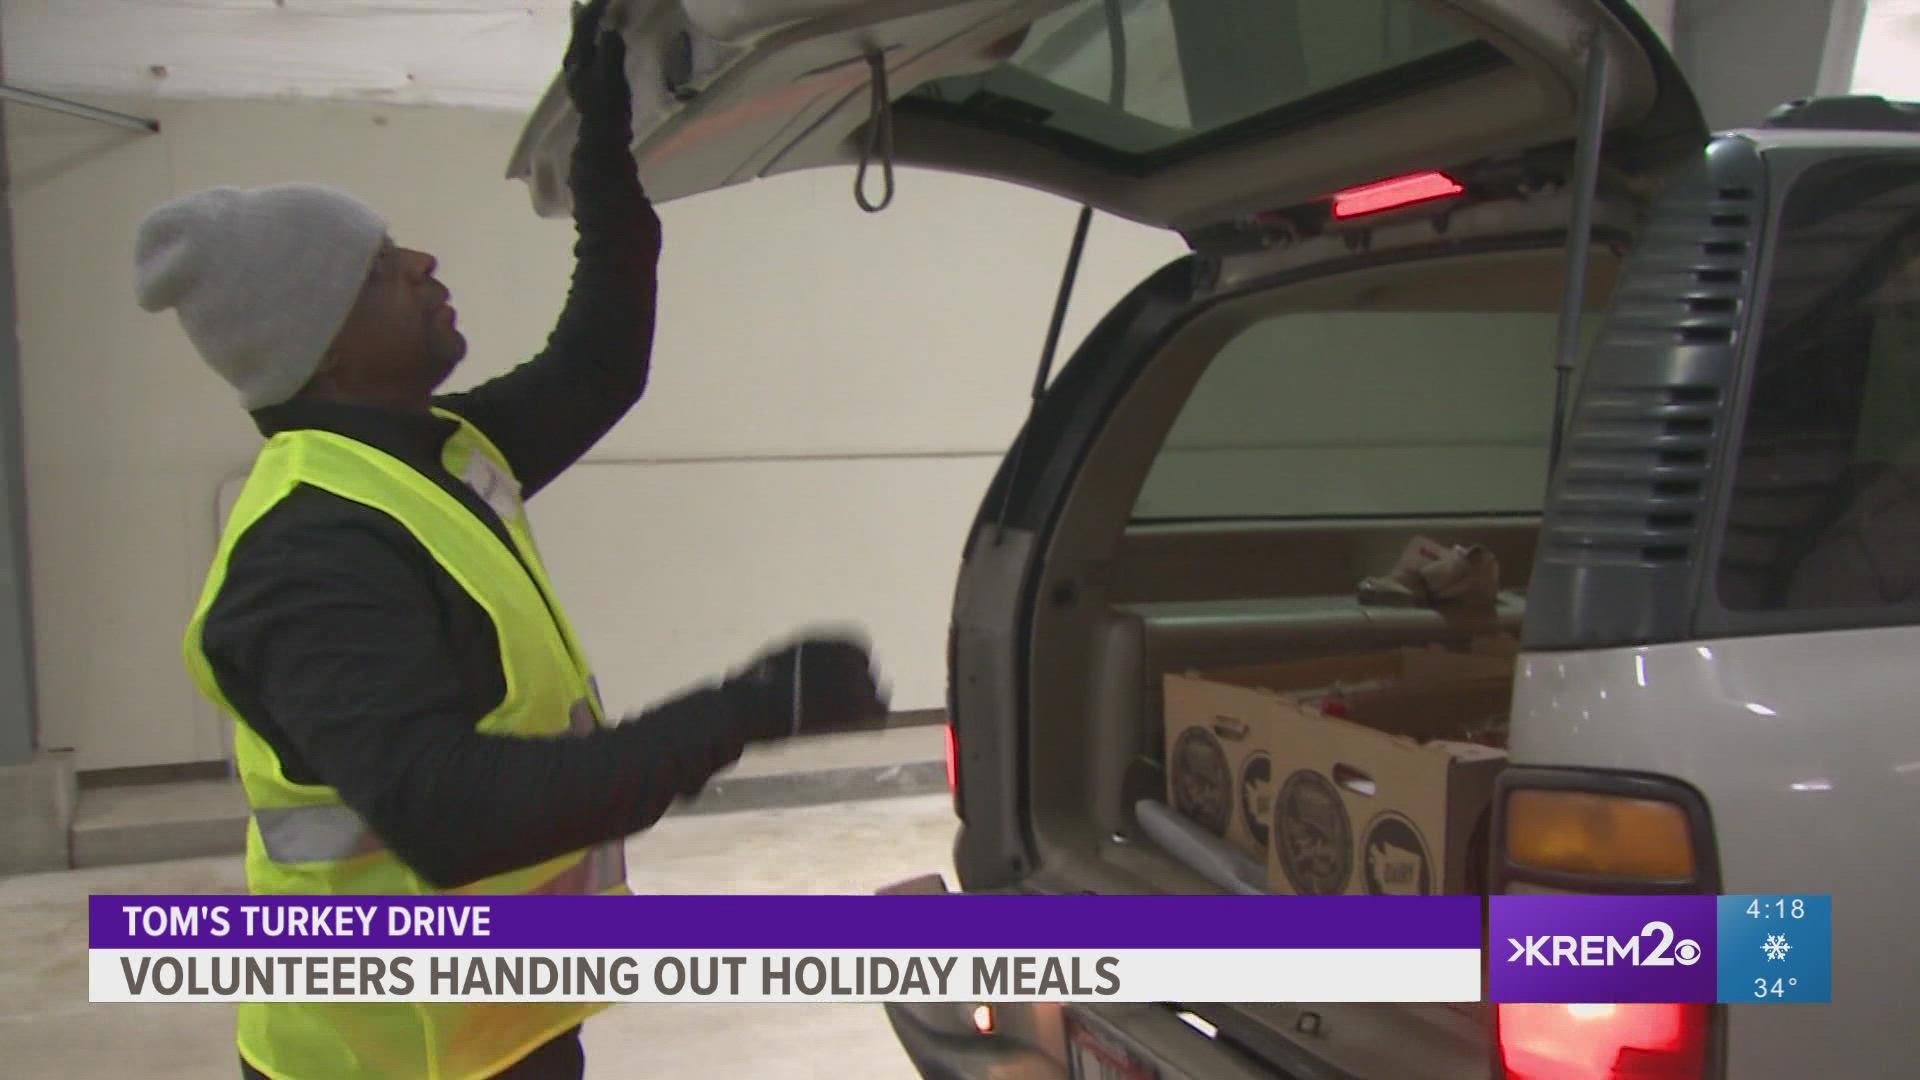 Second Harvest helped gather and distribute Thanksgiving dinners for Tom's Turkey Drive.